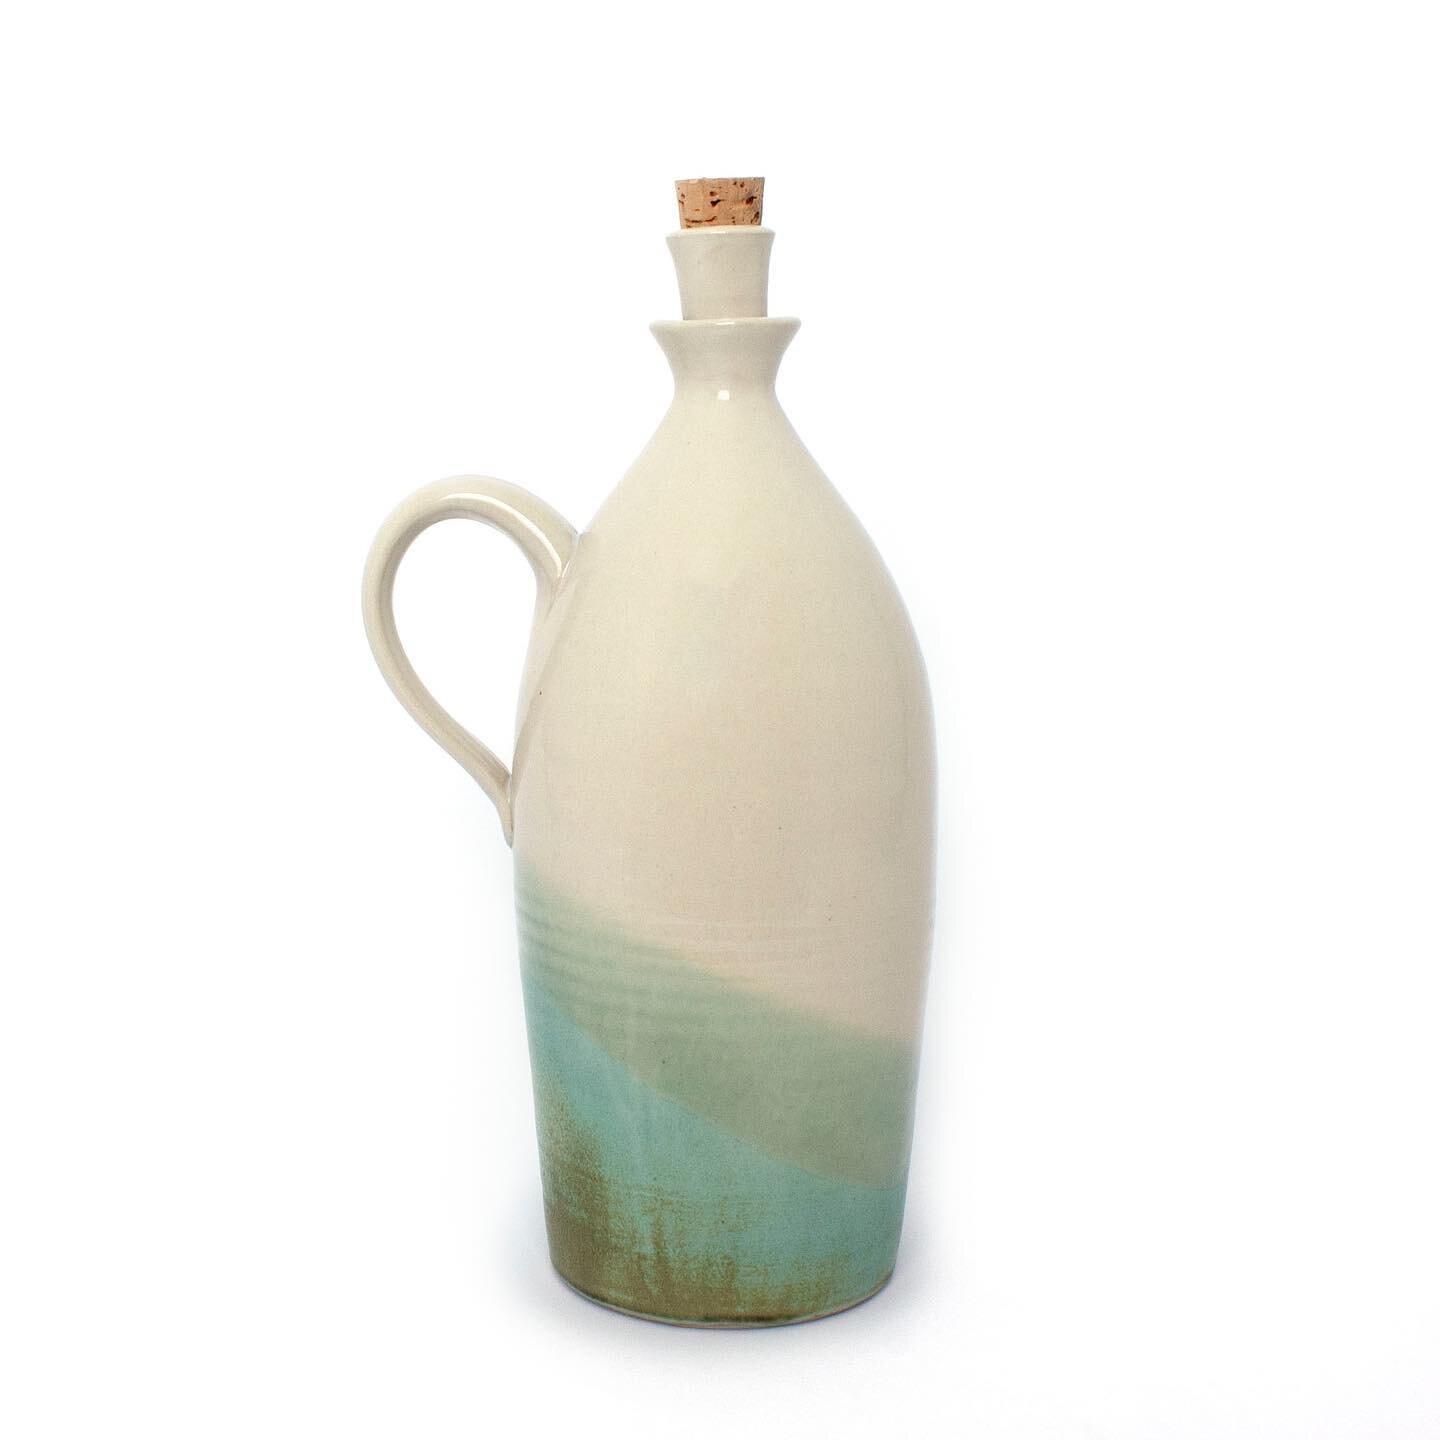 Oil bottle with drip catcher by @charlie.barmonde &mdash; one of several unique oil bottle designs available online.
.
.
.
.
.
.
.

#archcontemporary #archclay #tivertonfourcorners #shoplocal #shopsmall #locallythrown #handmadegifts #shophandmade #co